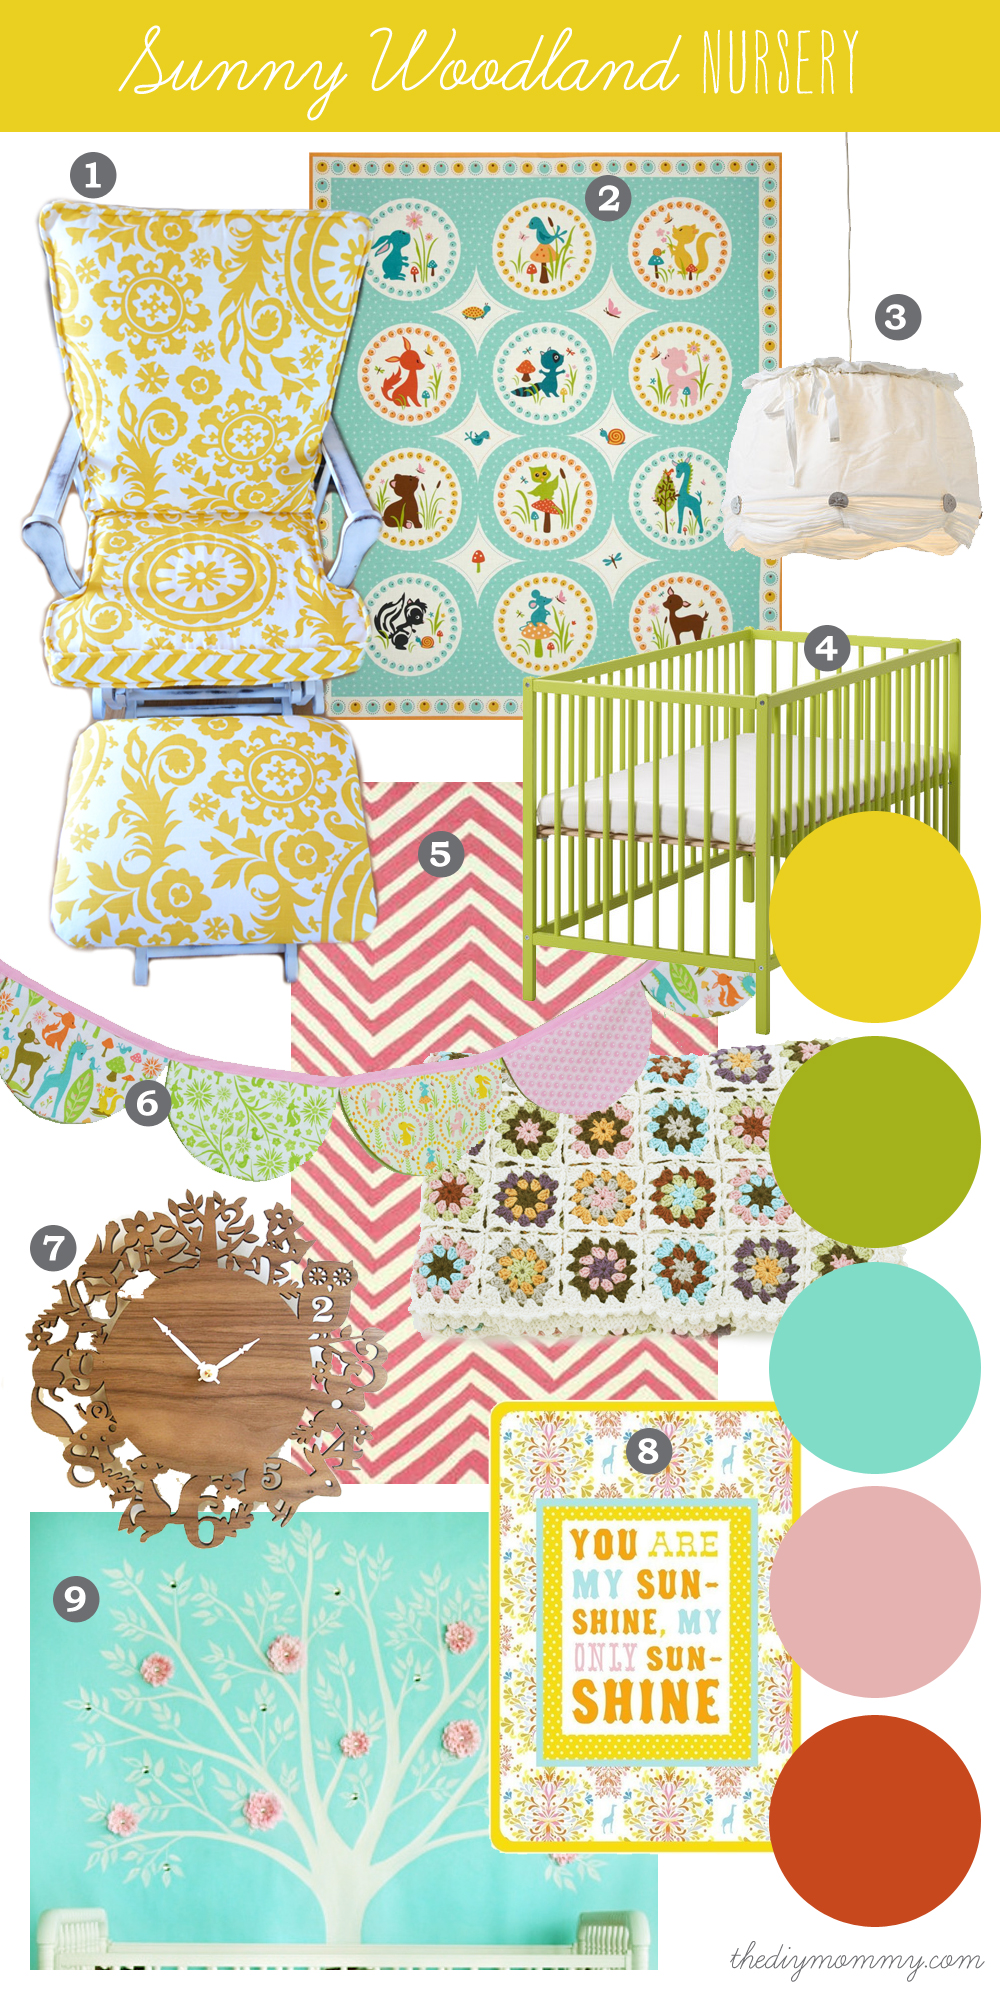 Mood Board: Sunny Woodland Nursery - Our DIY House by The DIY Mommy. Sorbet inspired shades of yellow, pink, coral and mint with retro woodland animals make a fun and sweet little nursery.